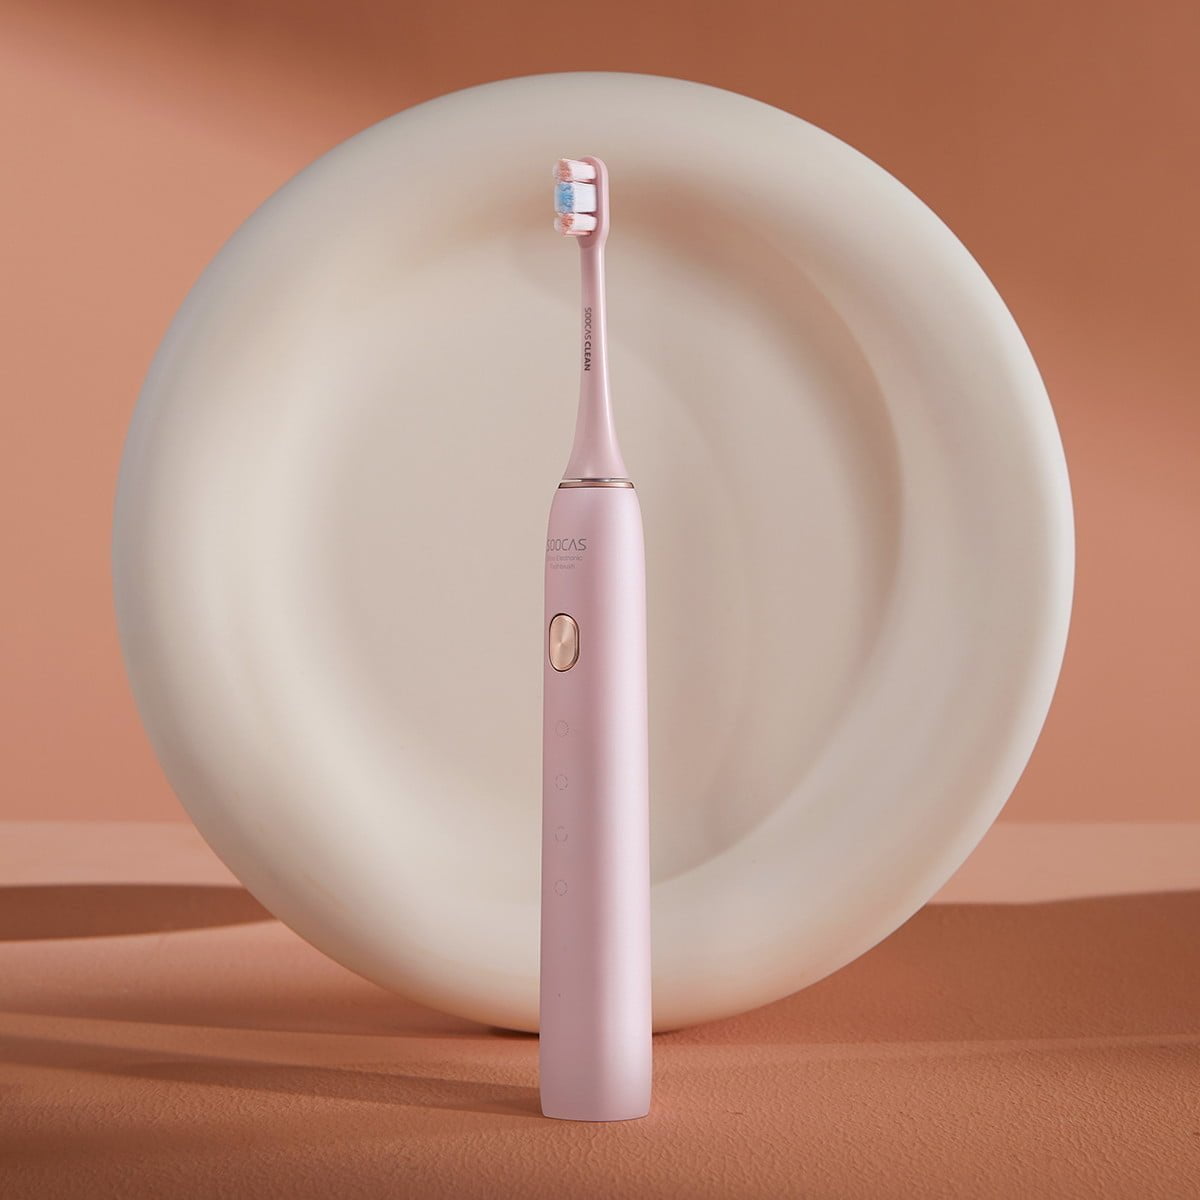 2B60E8Eb Af91 4475 A8C0 Ebeafb65F098 Xiaomi Xiaomi Toothbrush Soocare X3U, Soocas Upgraded Electric Sonic Vibration Waterproof Lightning-Fast Charging 2020 Newest Version [Video Width=&Quot;1280&Quot; Height=&Quot;720&Quot; Mp4=&Quot;Https://Lablaab.com/Wp-Content/Uploads/2020/05/Khn4Gzxy4Rcnwtethdd__Hd.mp4&Quot;][/Video] Soocas X3U Sonic Toothbrush Electric (Pink) 2020 Model